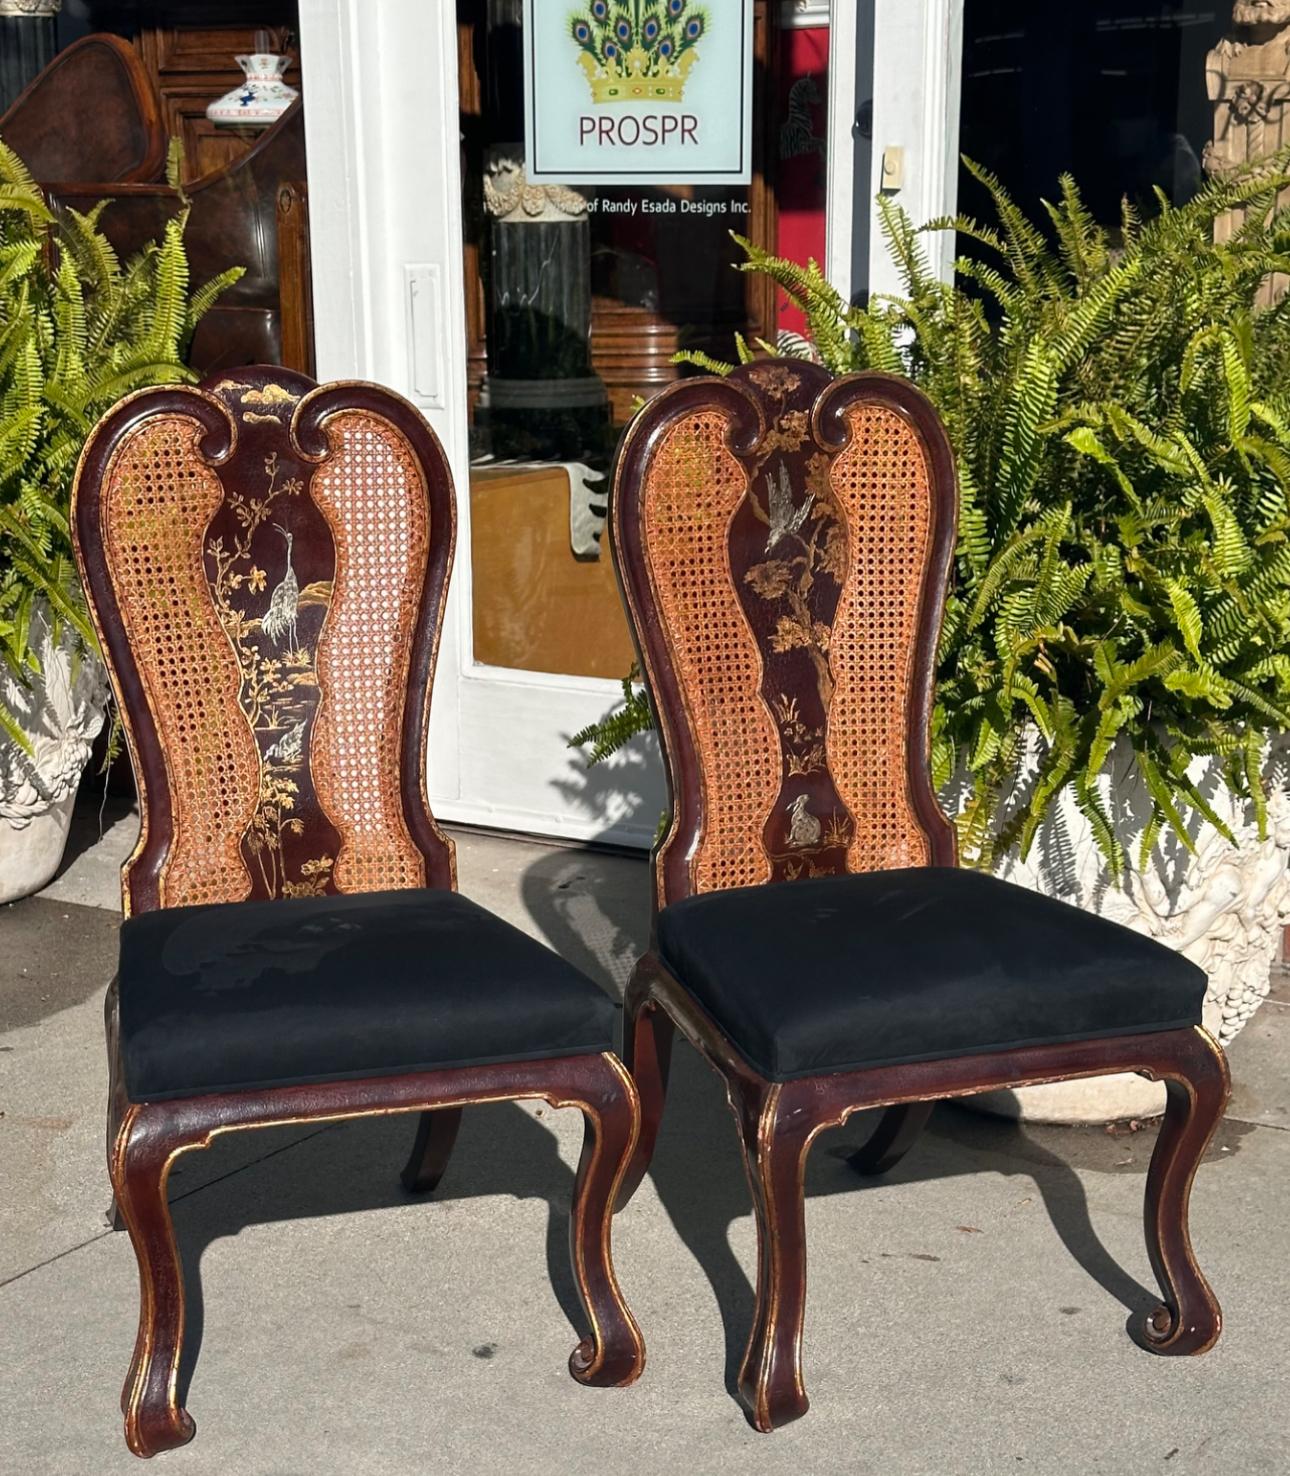 Cane Rose Tarlow Melrose House Chinoiserie Chairs - a Pair